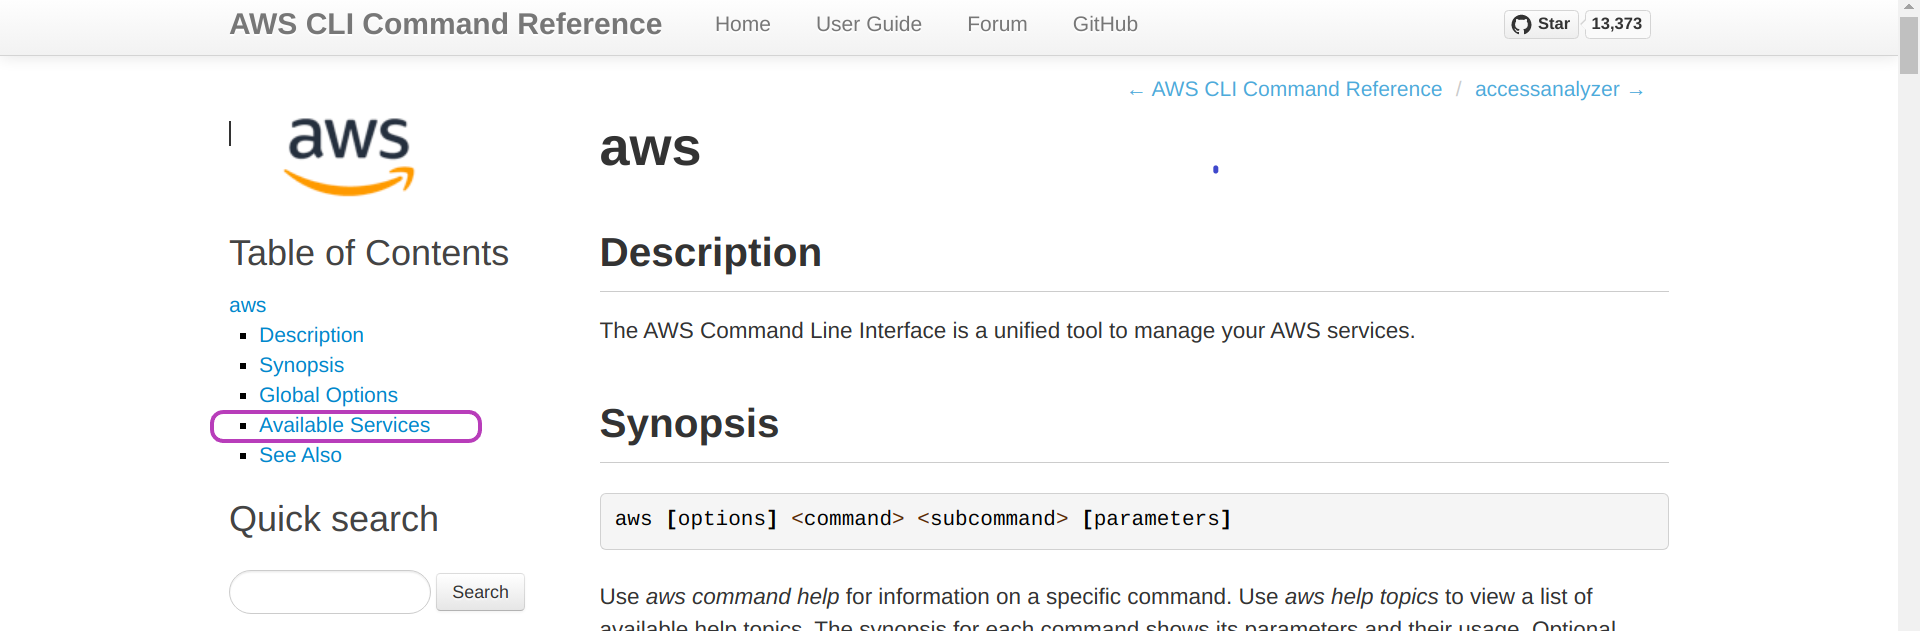 Screenshot of "AWS CLI Command Reference" page in a browser showing the option "Available Services" circled.